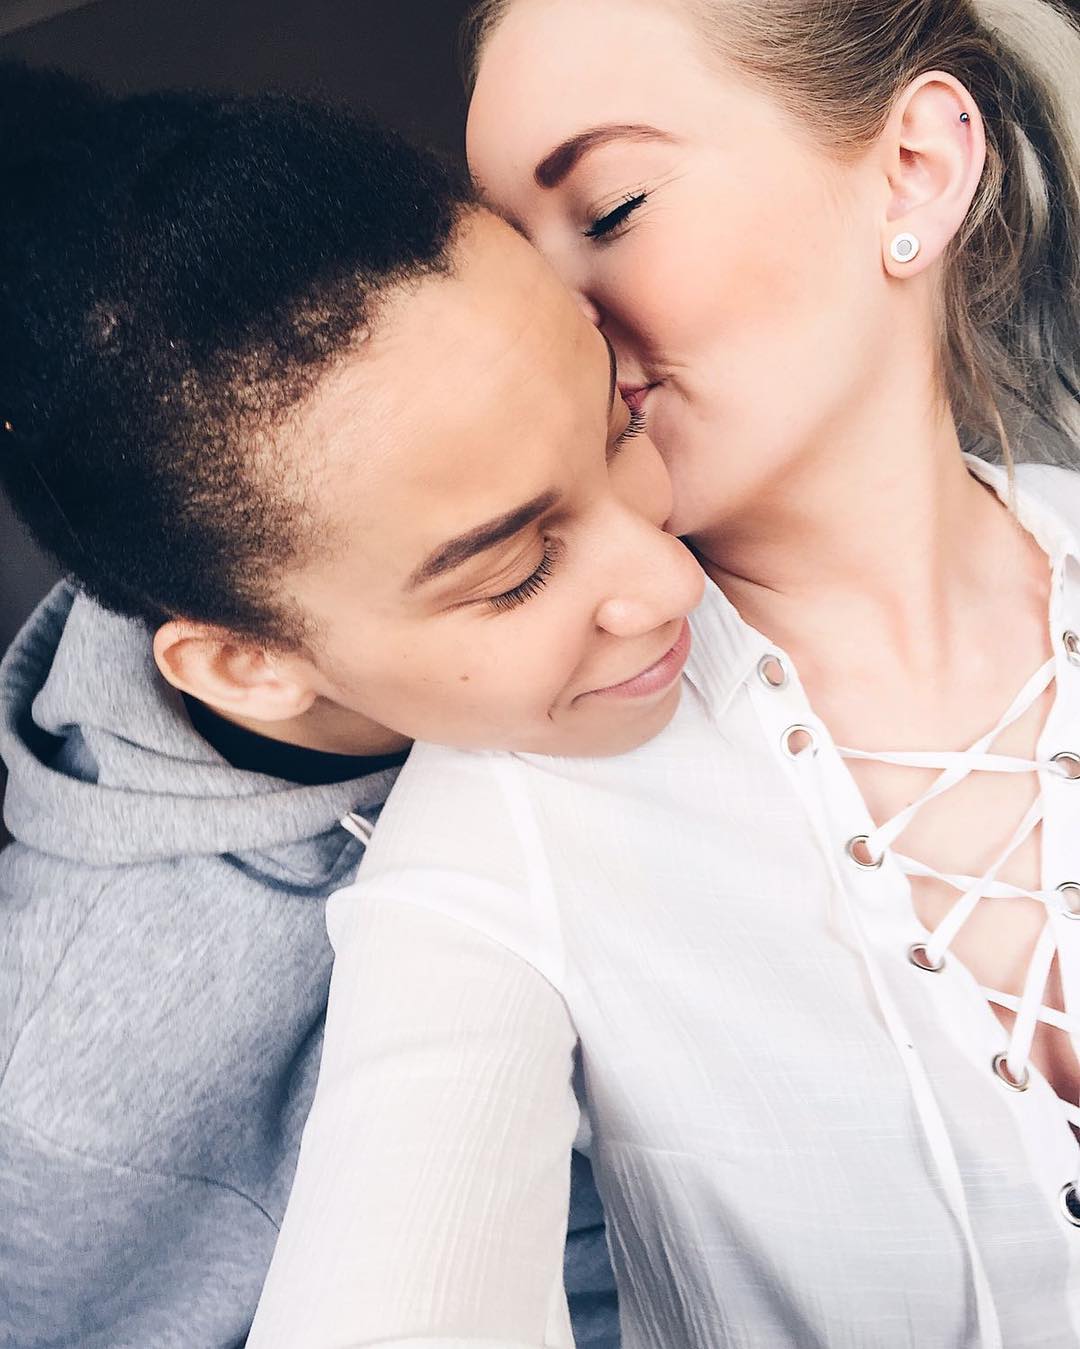 becca pecca recommends lesbian couples on instagram pic